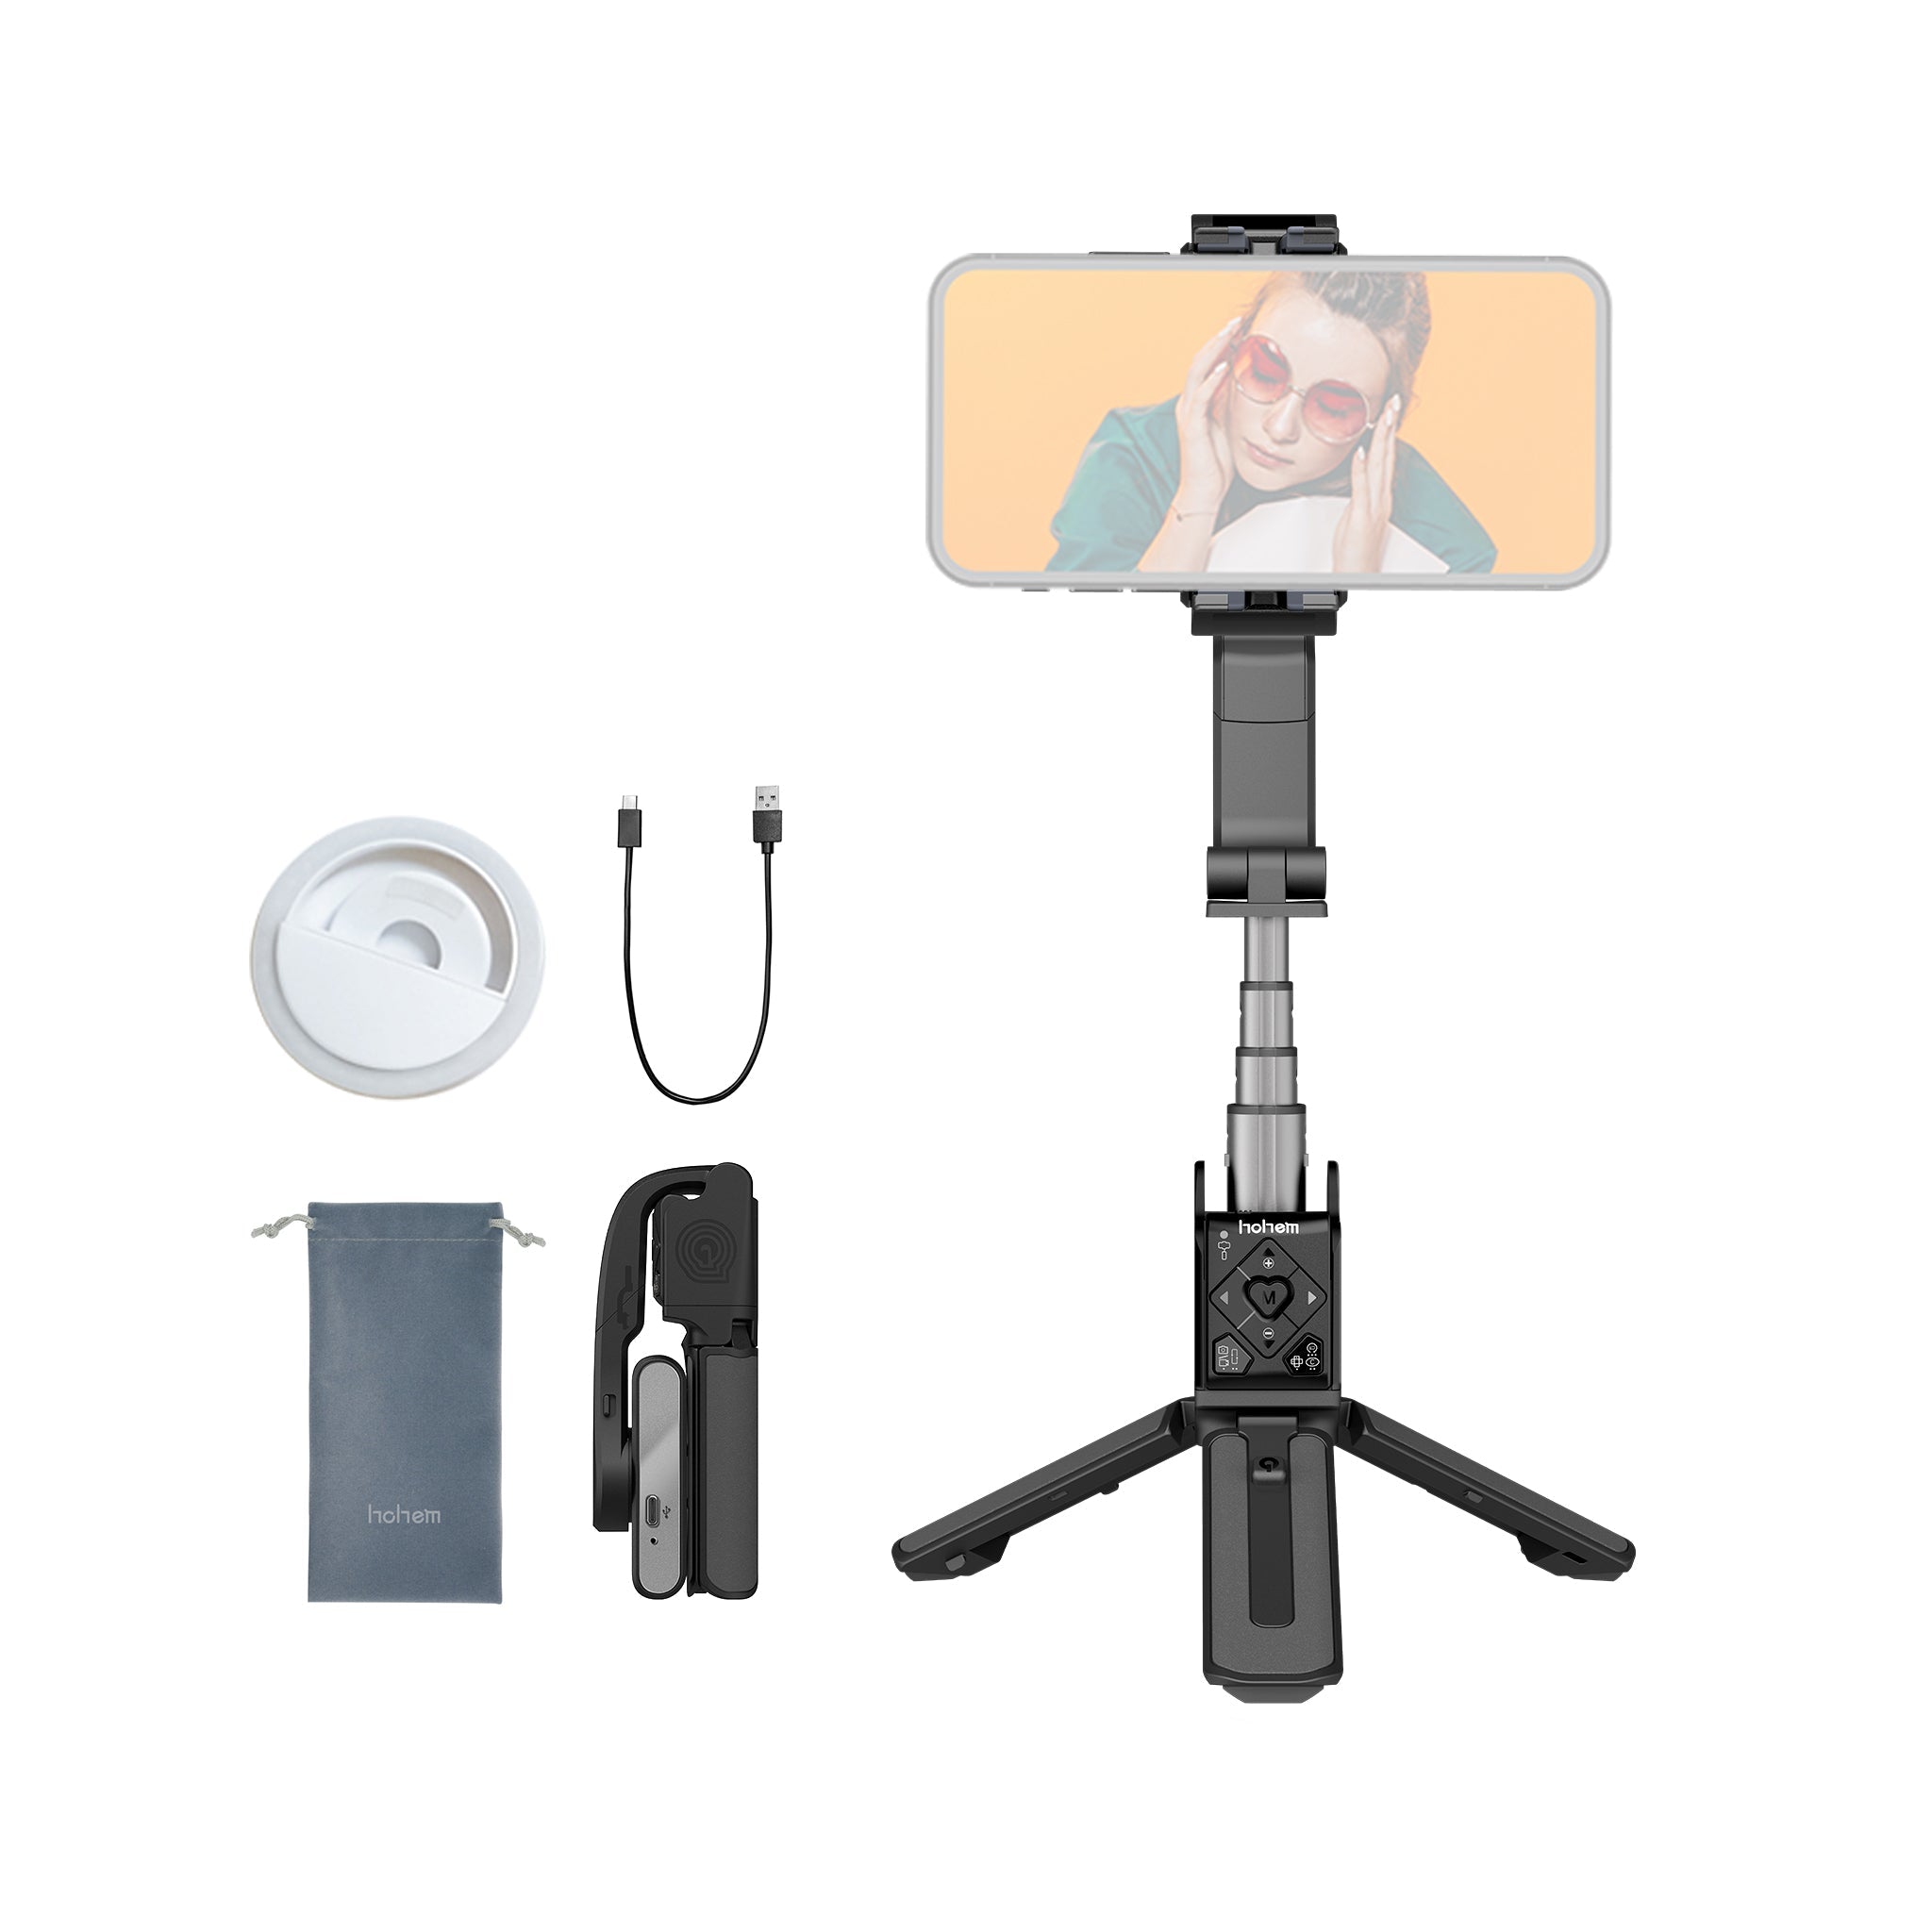 Hohem iSteady Q Multi-purpose Gimbal Stabilizer as a Selfie Stick and Tripod